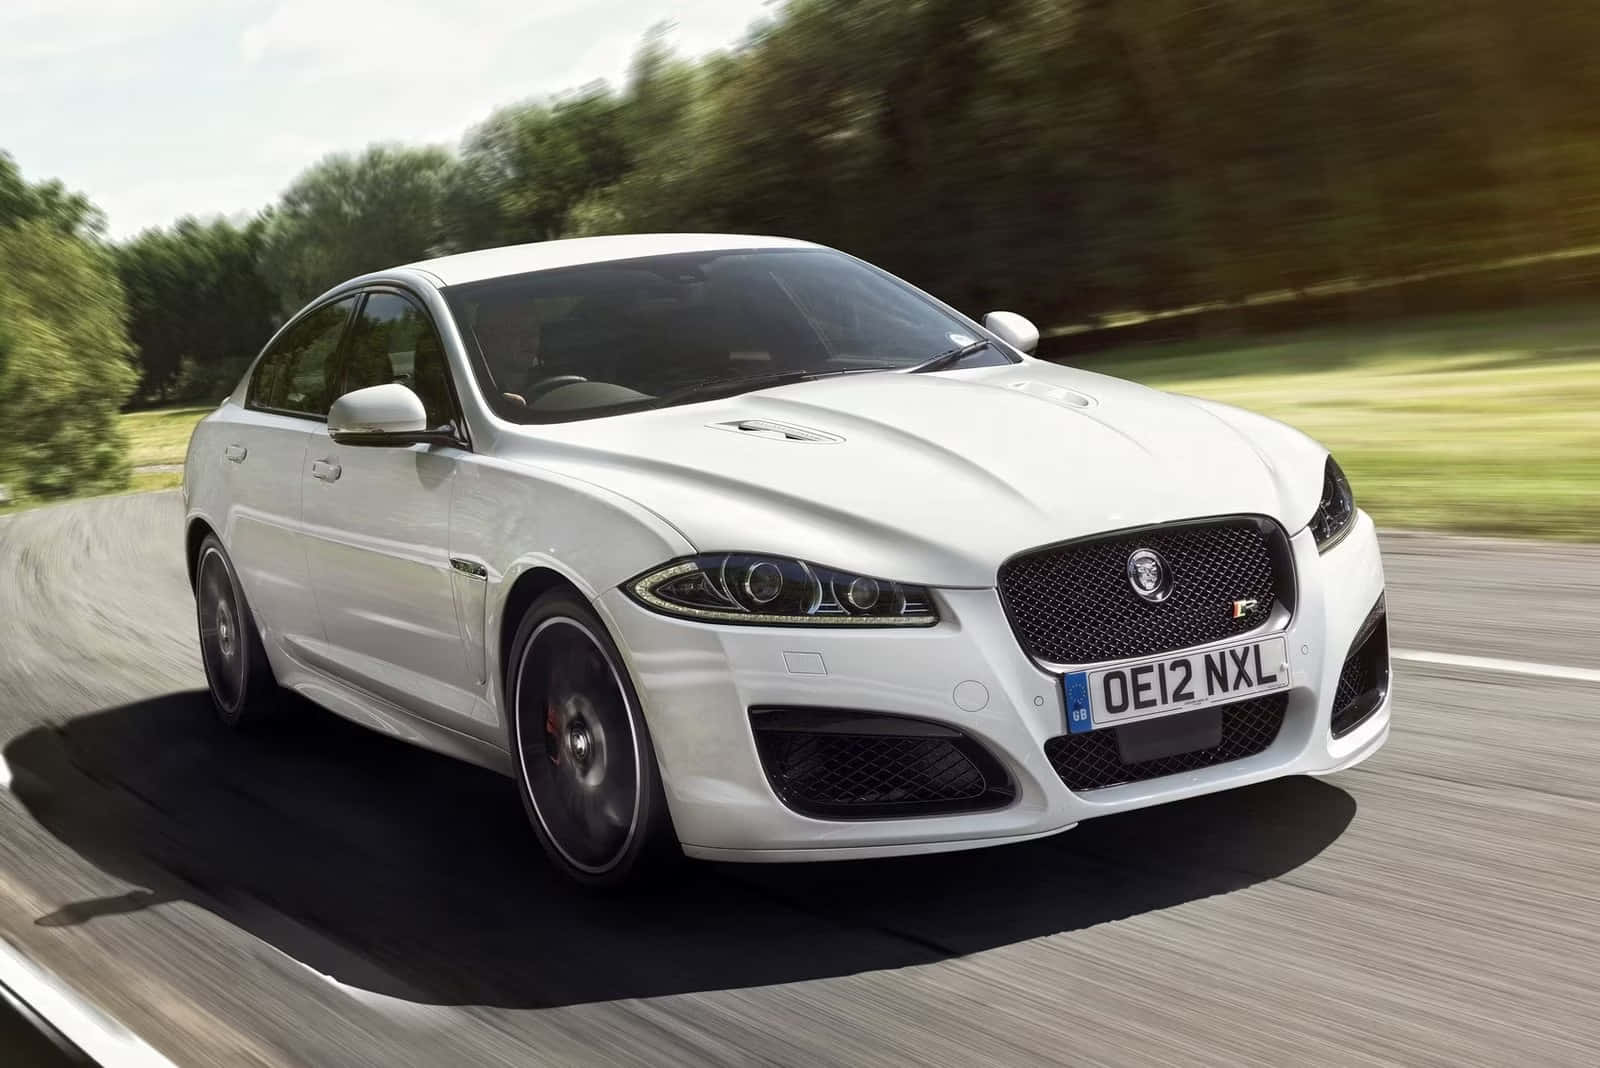 The Powerful and Luxurious Jaguar XFR in Action Wallpaper